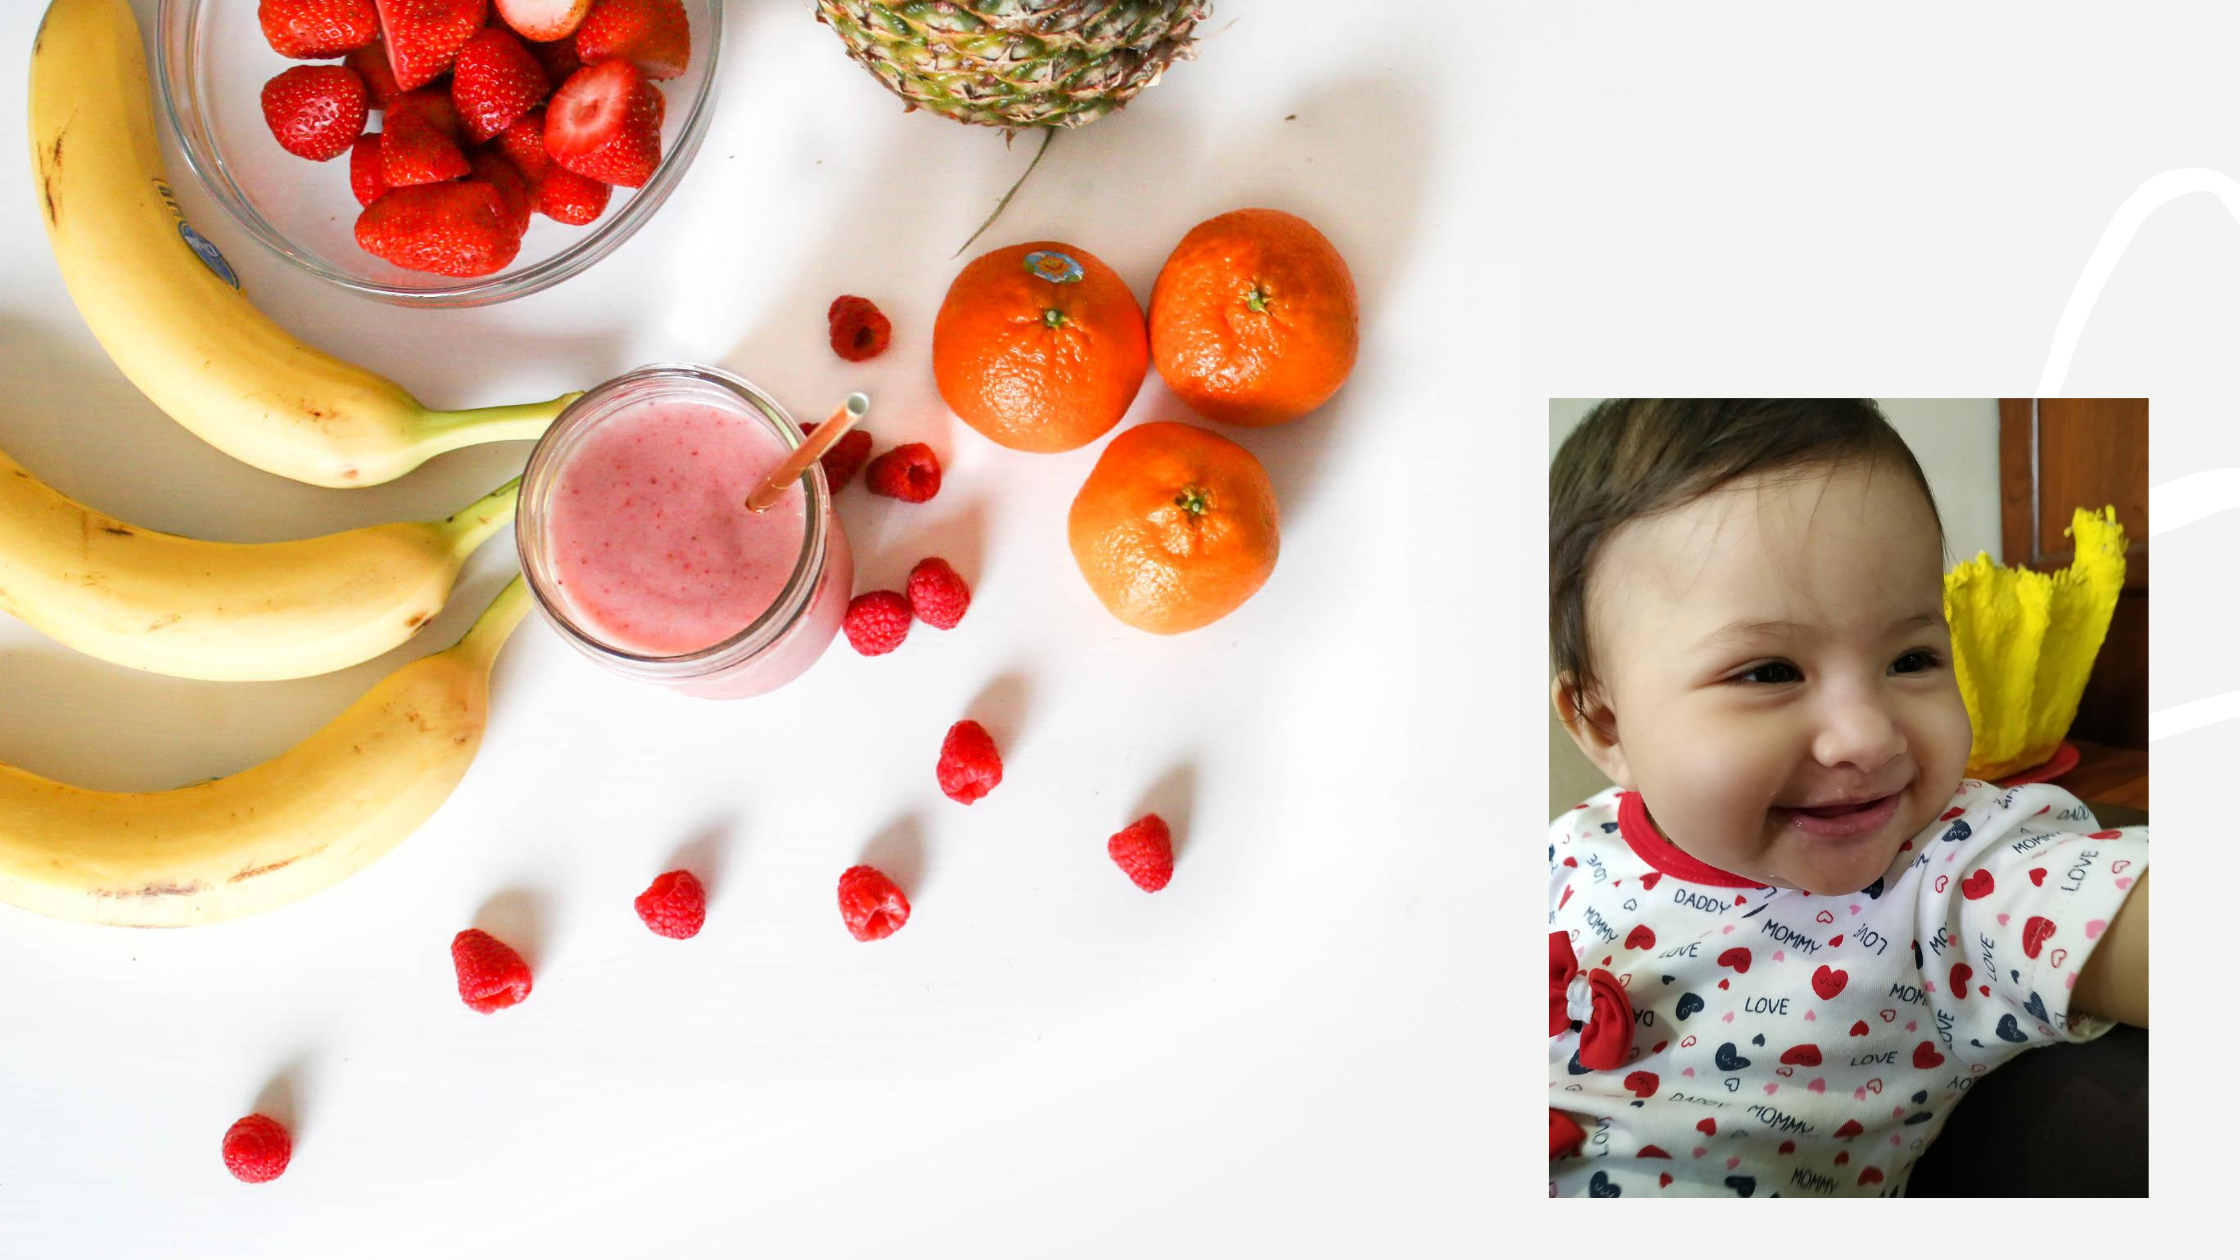 When and how to start solids to babies?